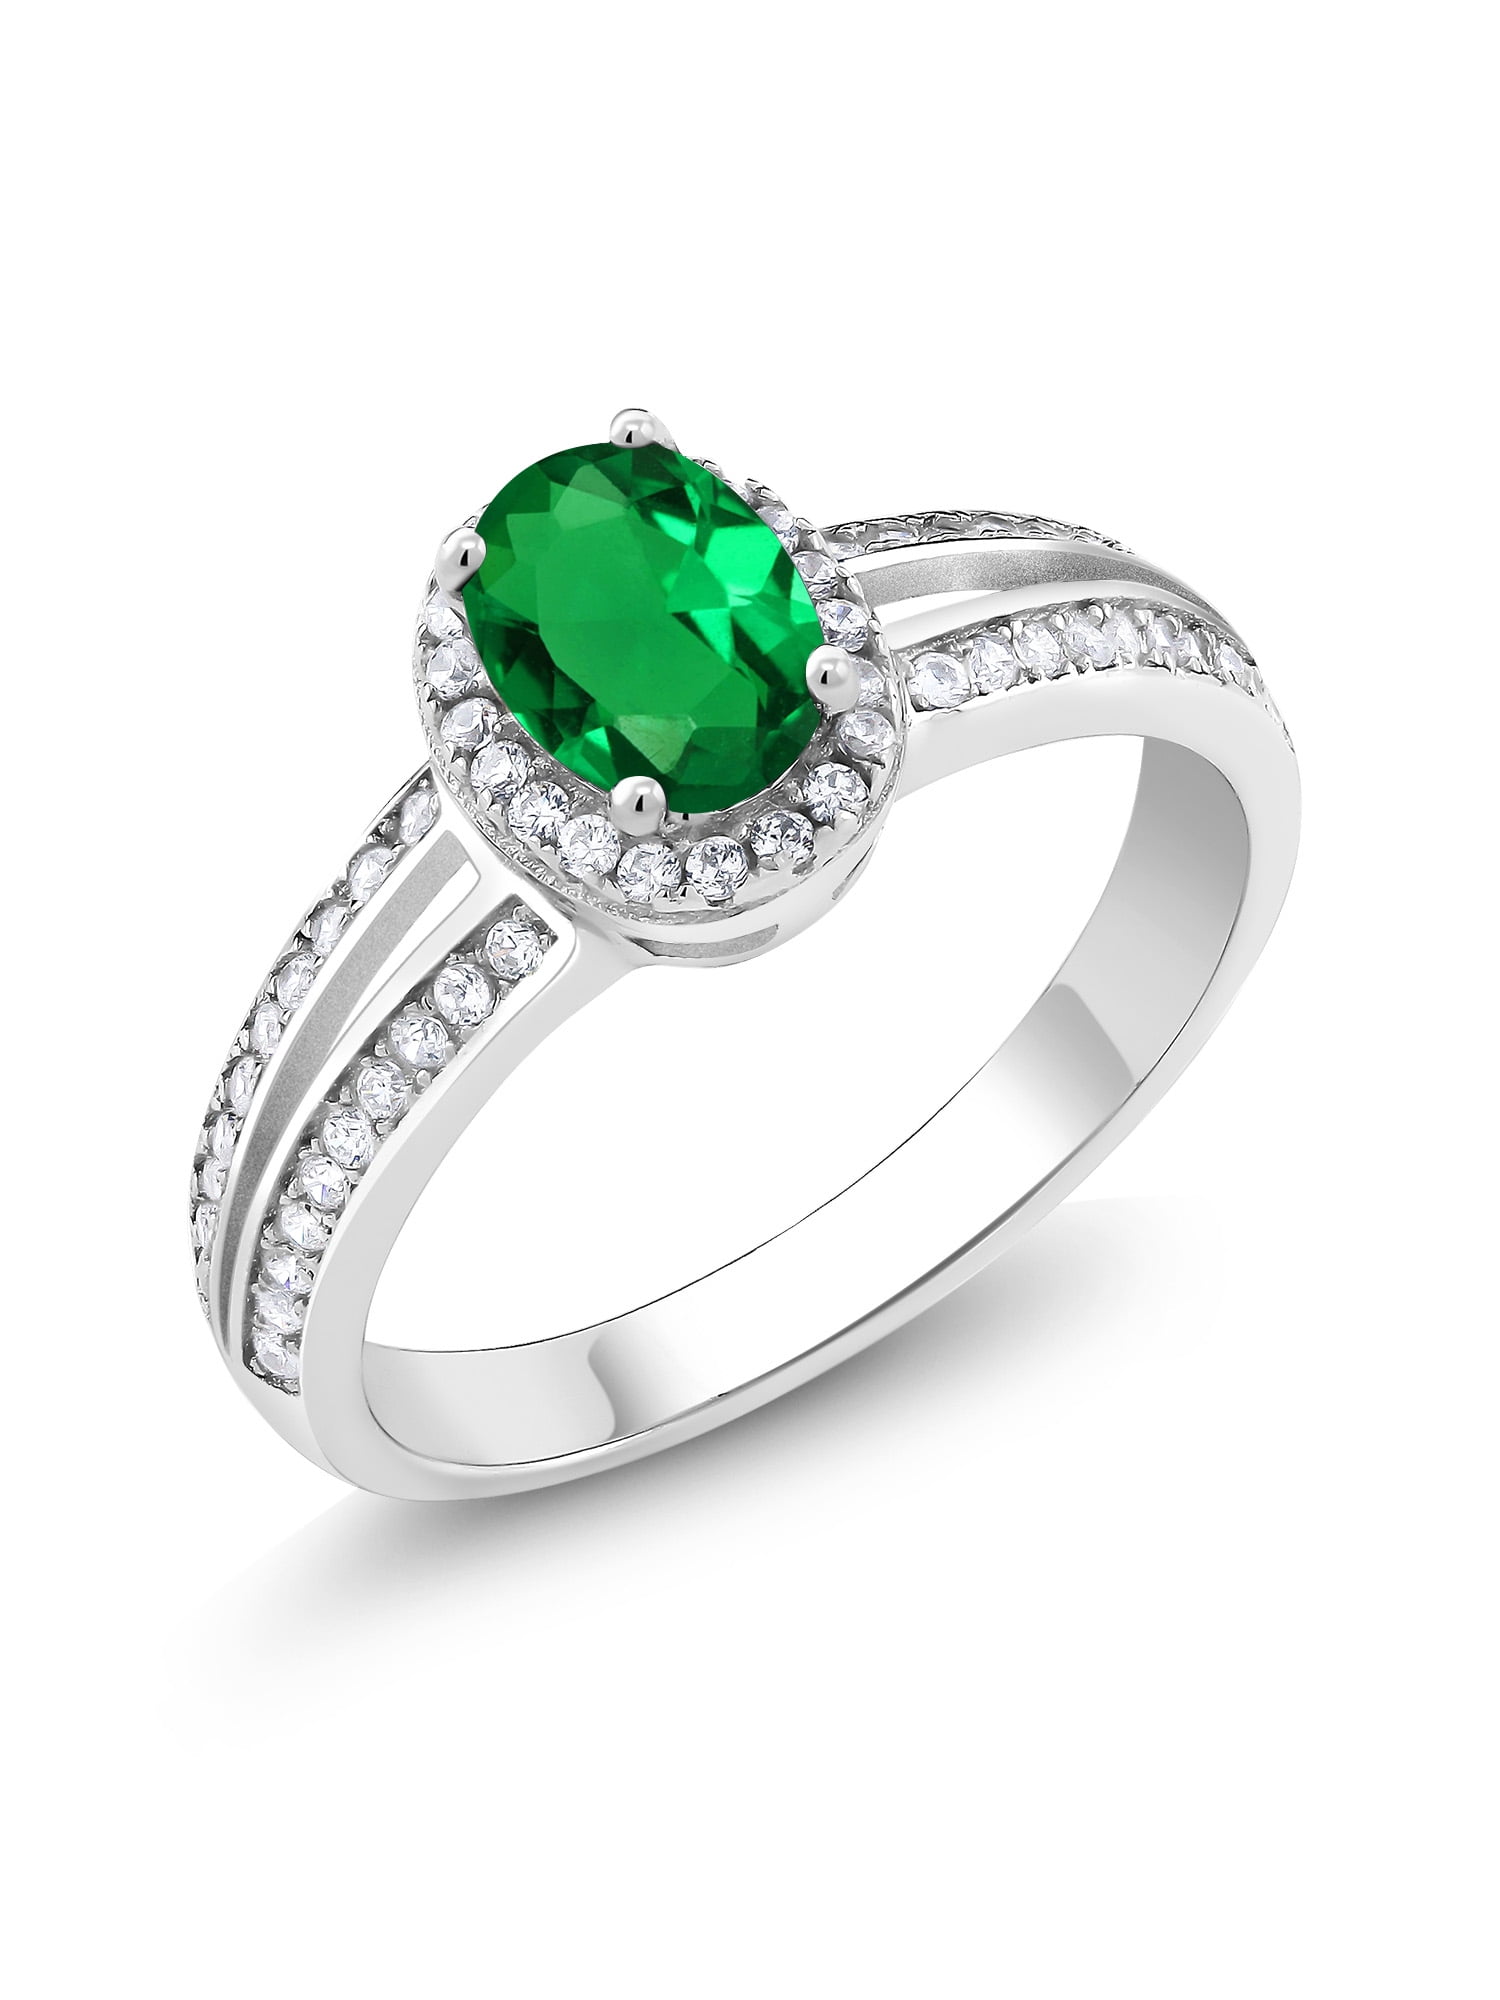 Gem Stone King - 1.20 Ct Oval Green Simulated Emerald 925 Sterling ...